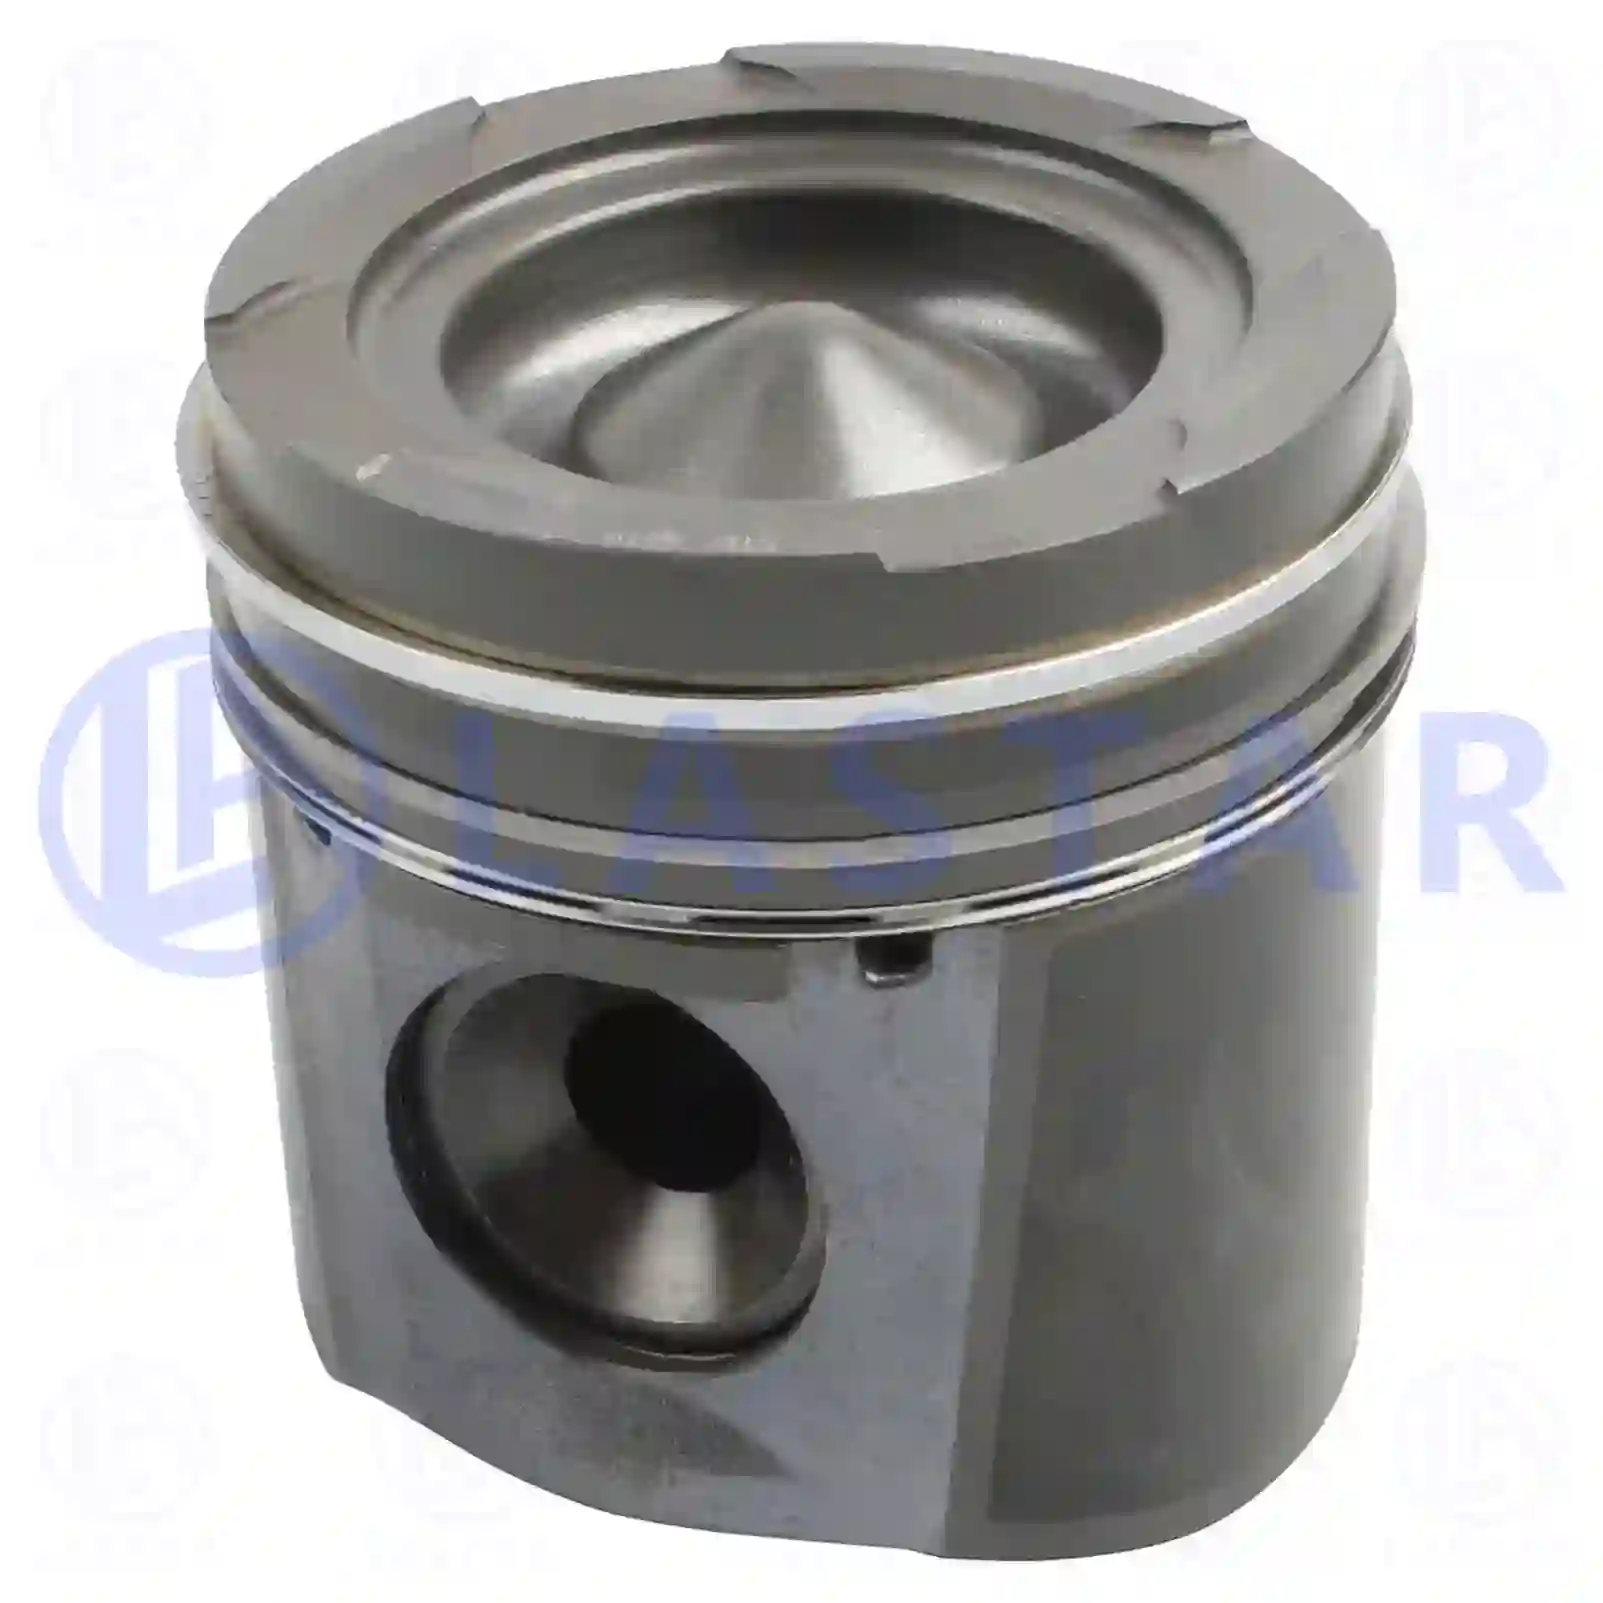 Piston, complete with rings, 77701528, 51025006041, 51025006070, 51025006071, 51025006199, 51025006200, 51025006201, 51025006300, 51025110535 ||  77701528 Lastar Spare Part | Truck Spare Parts, Auotomotive Spare Parts Piston, complete with rings, 77701528, 51025006041, 51025006070, 51025006071, 51025006199, 51025006200, 51025006201, 51025006300, 51025110535 ||  77701528 Lastar Spare Part | Truck Spare Parts, Auotomotive Spare Parts